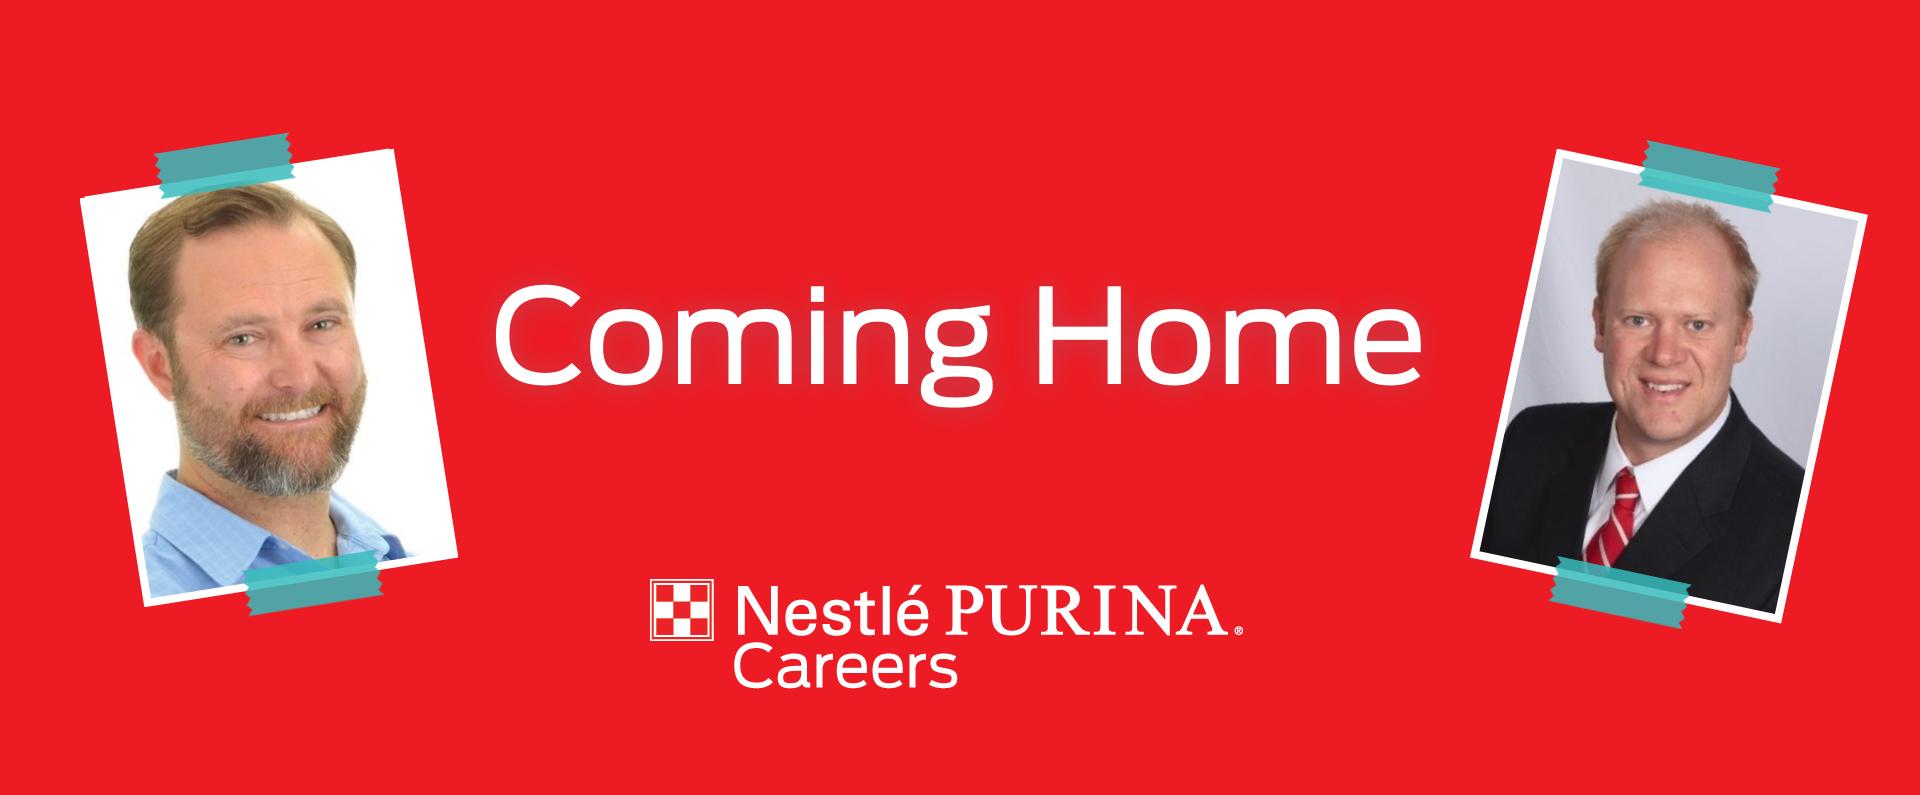 Coming_home_header